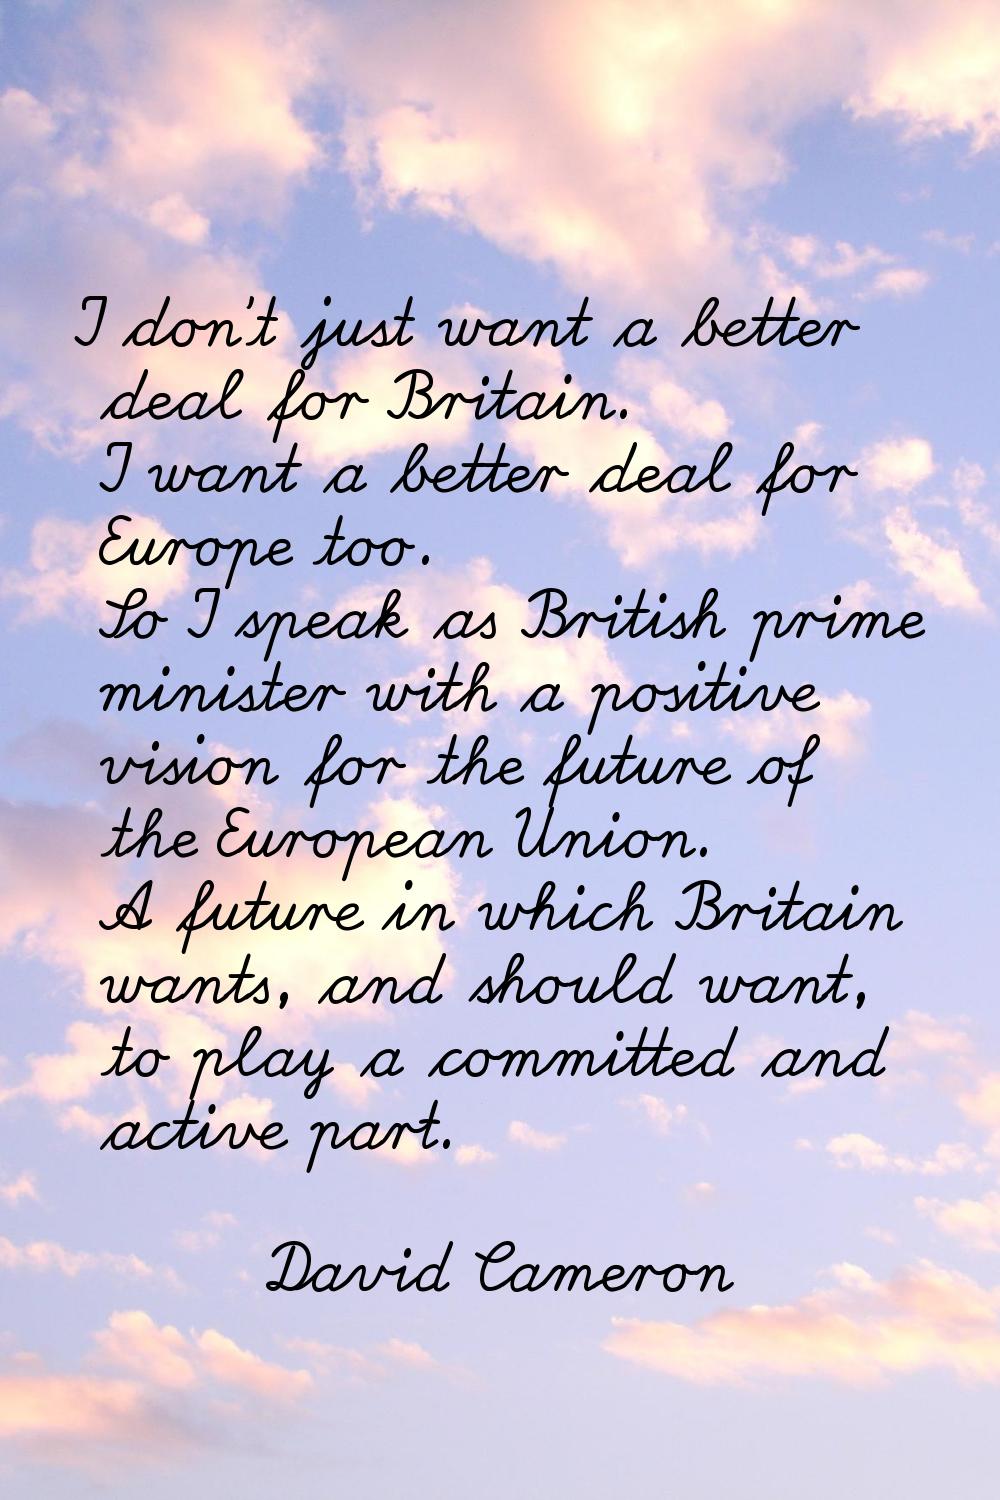 I don't just want a better deal for Britain. I want a better deal for Europe too. So I speak as Bri